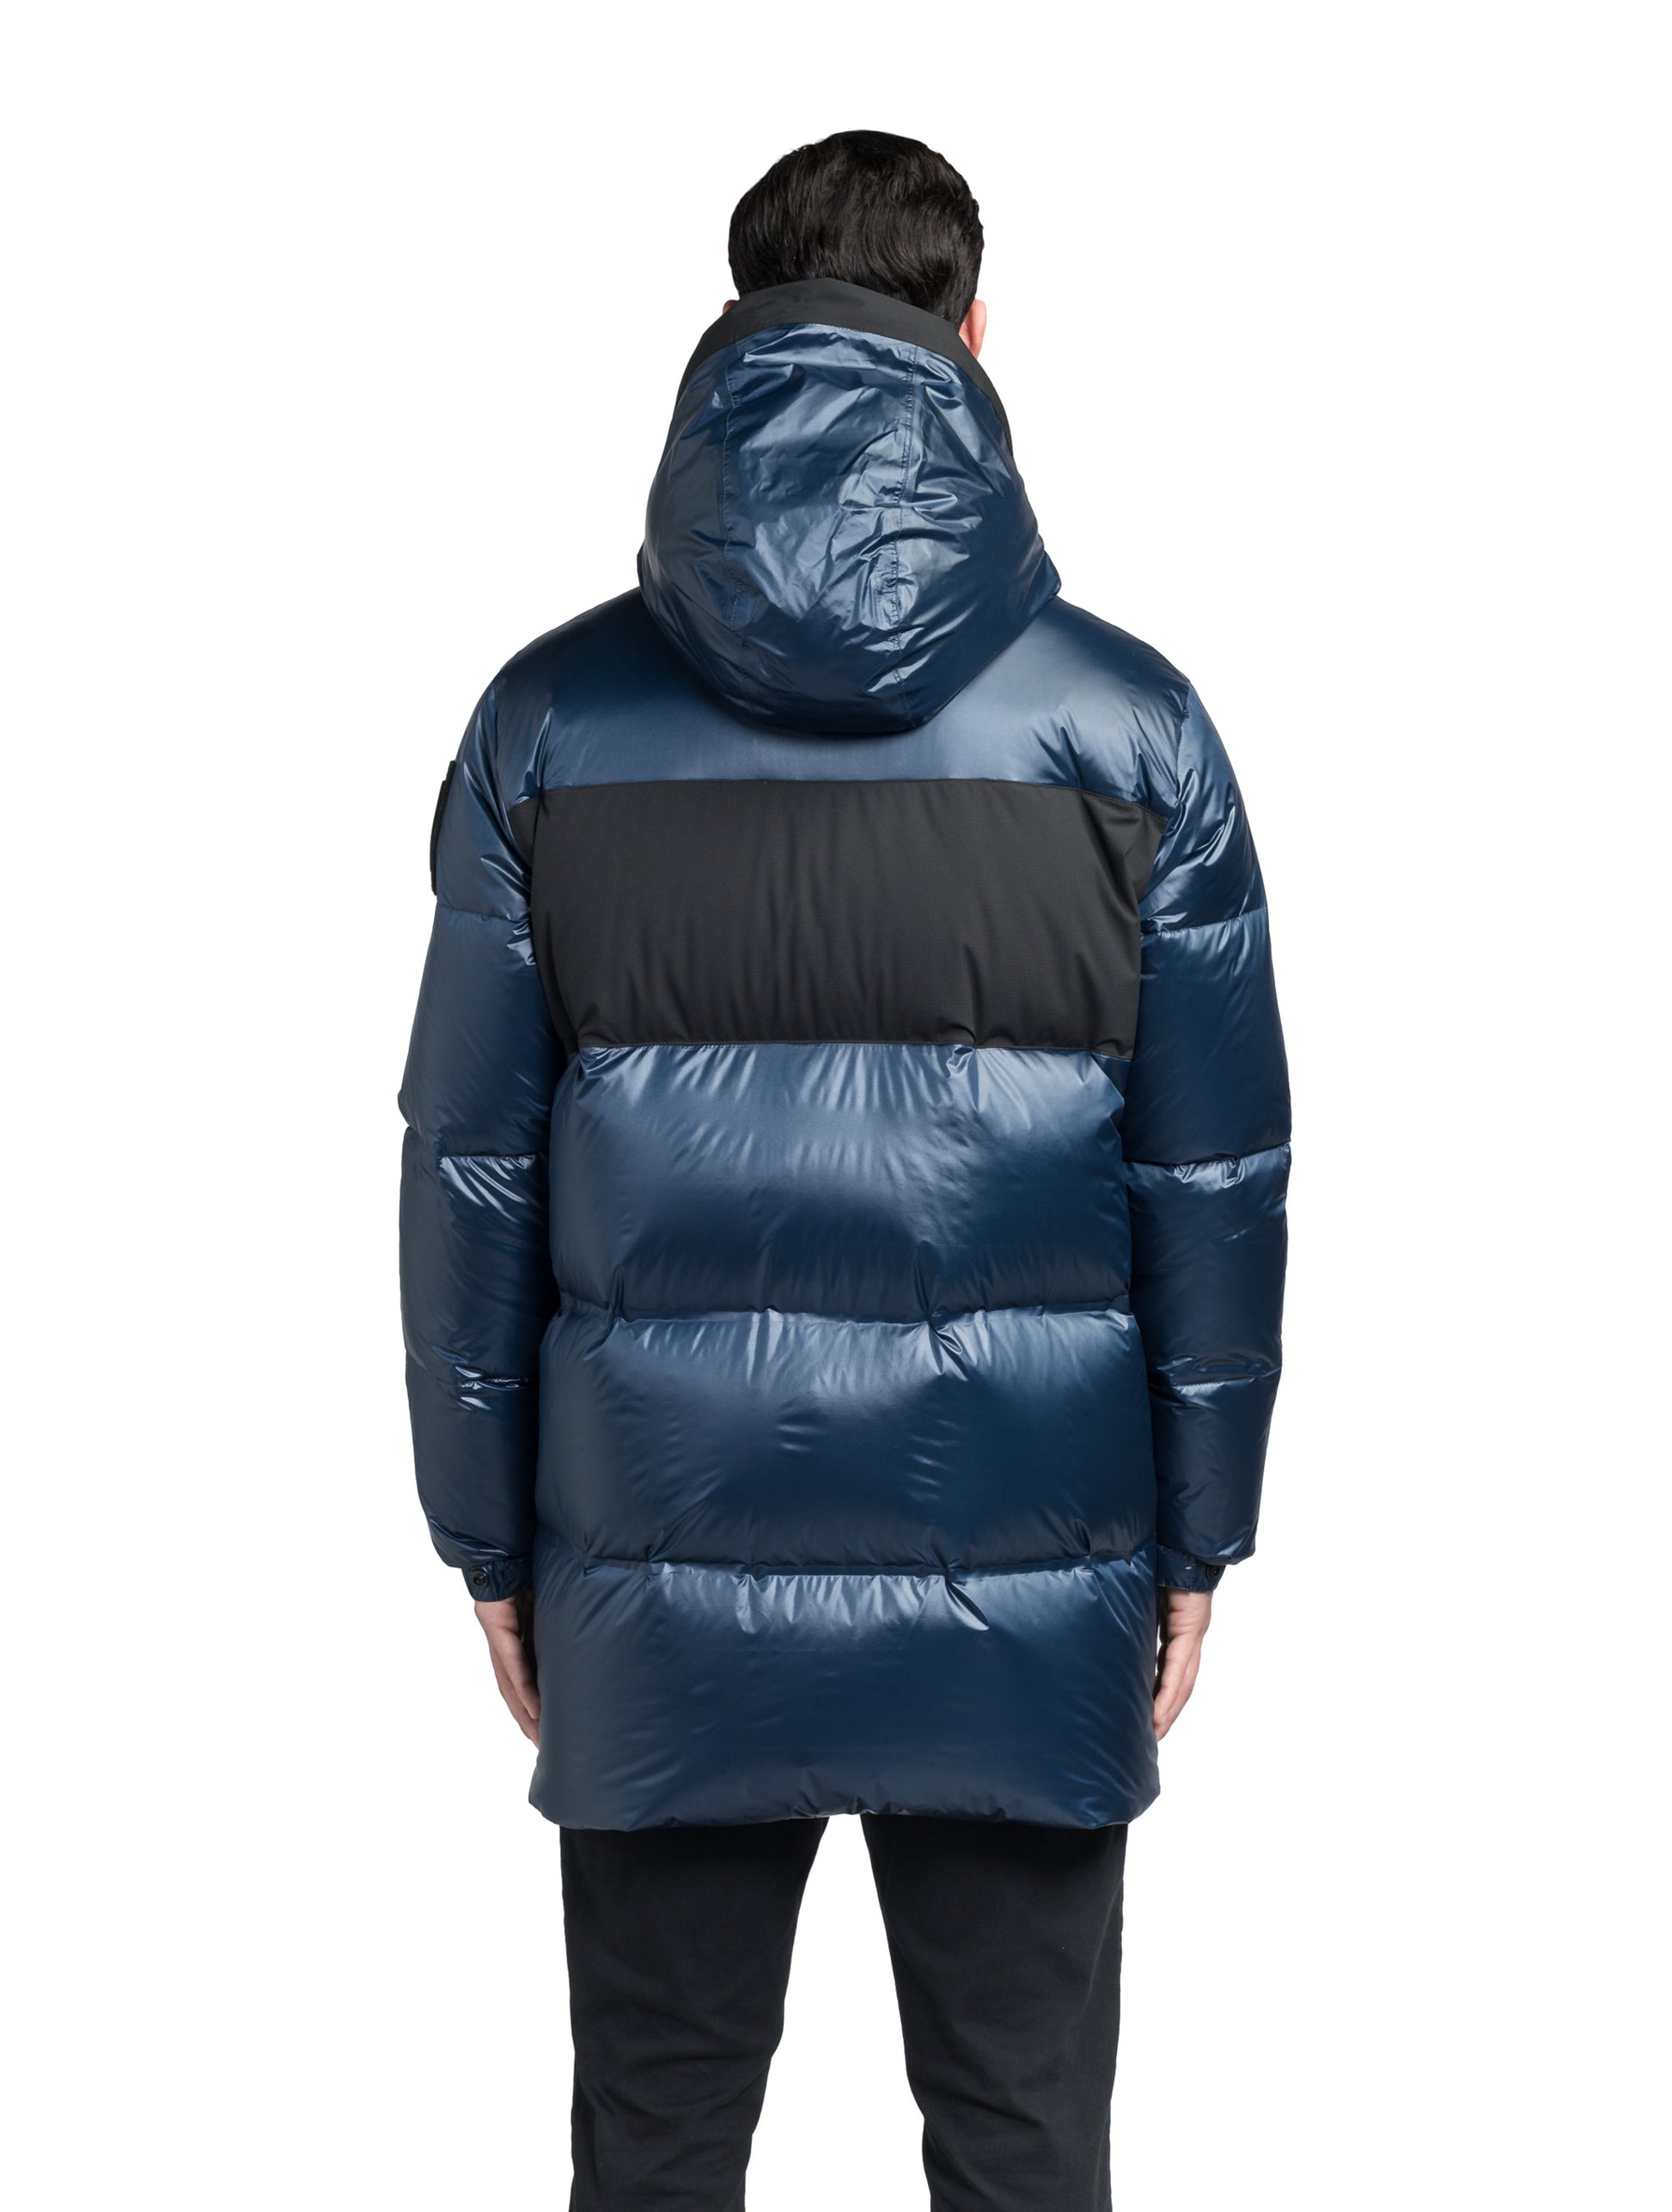 A Brief History of the Puffer Jacket